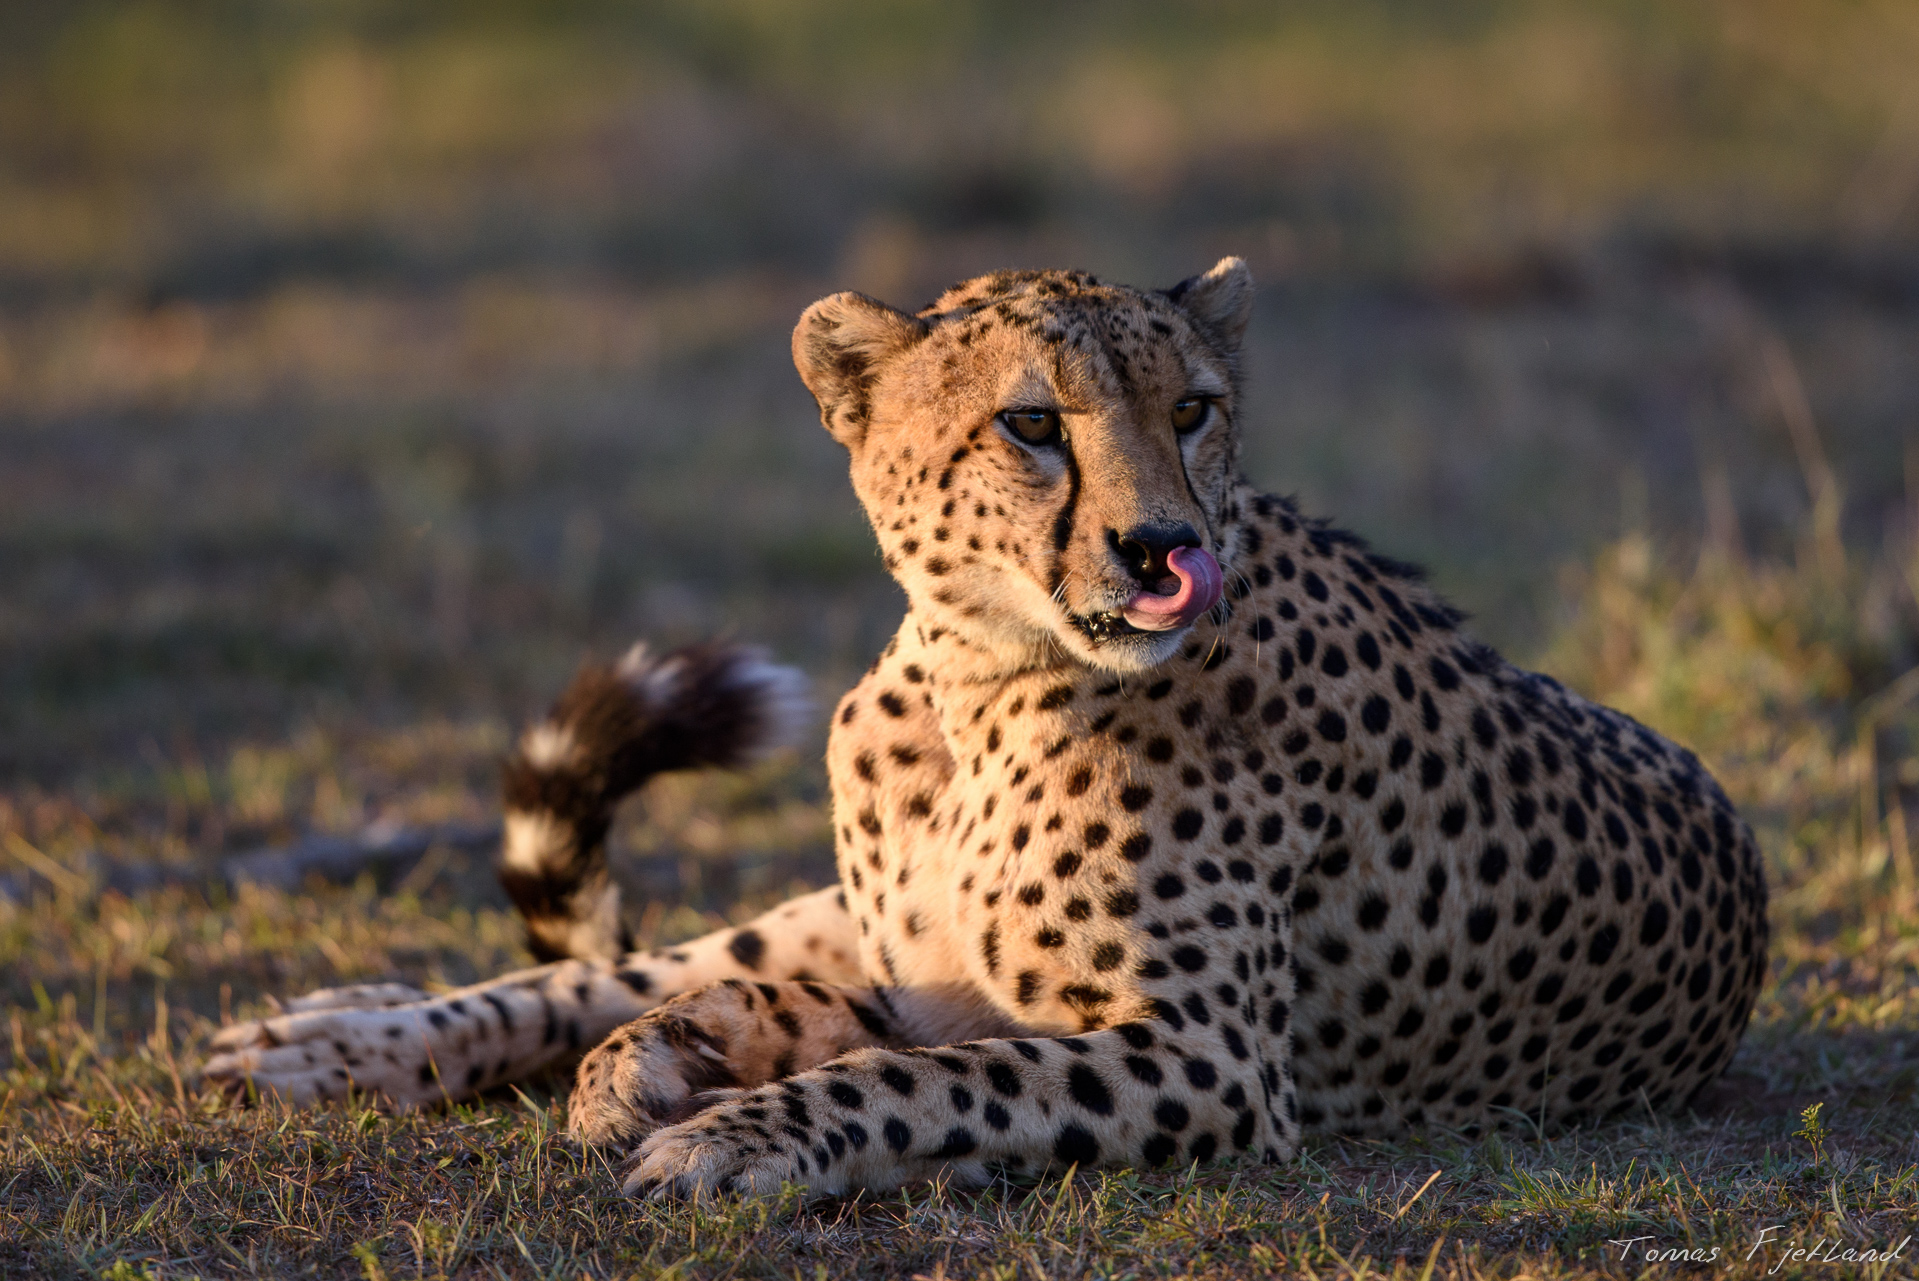 One of the Ololo brothers bathed in early sunset light